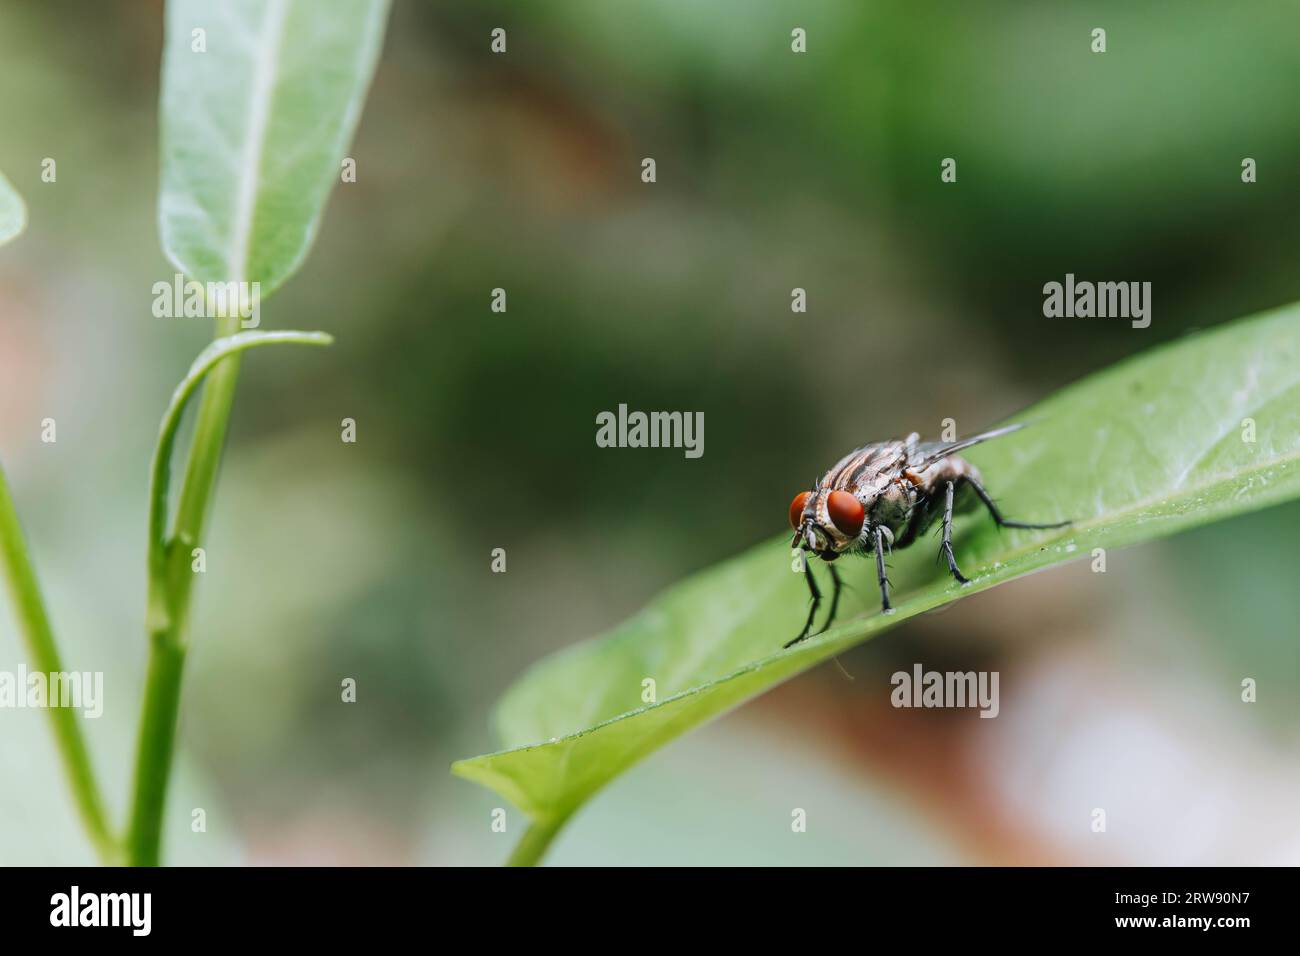 Macro shot of a housefly perched on a leaf with a bokeh background Stock Photo